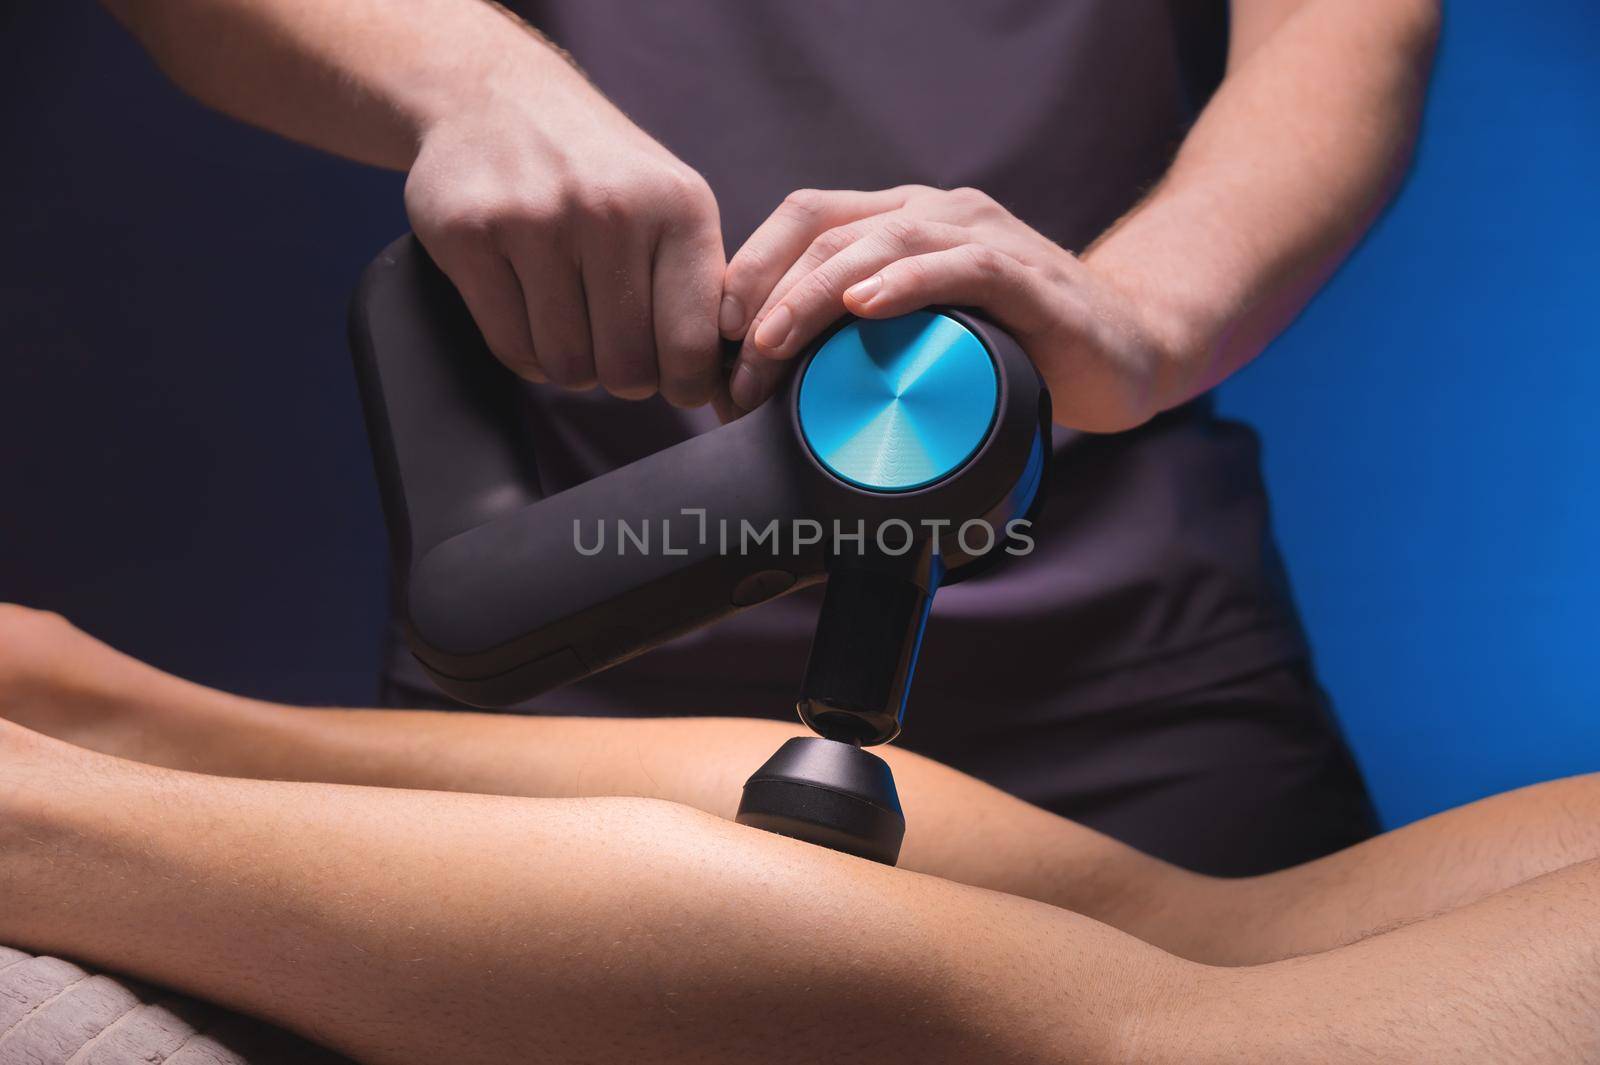 Percussion massage on the back of the leg. Massage the back of the thigh and the back of the calf muscles. Working as a percussion massager.